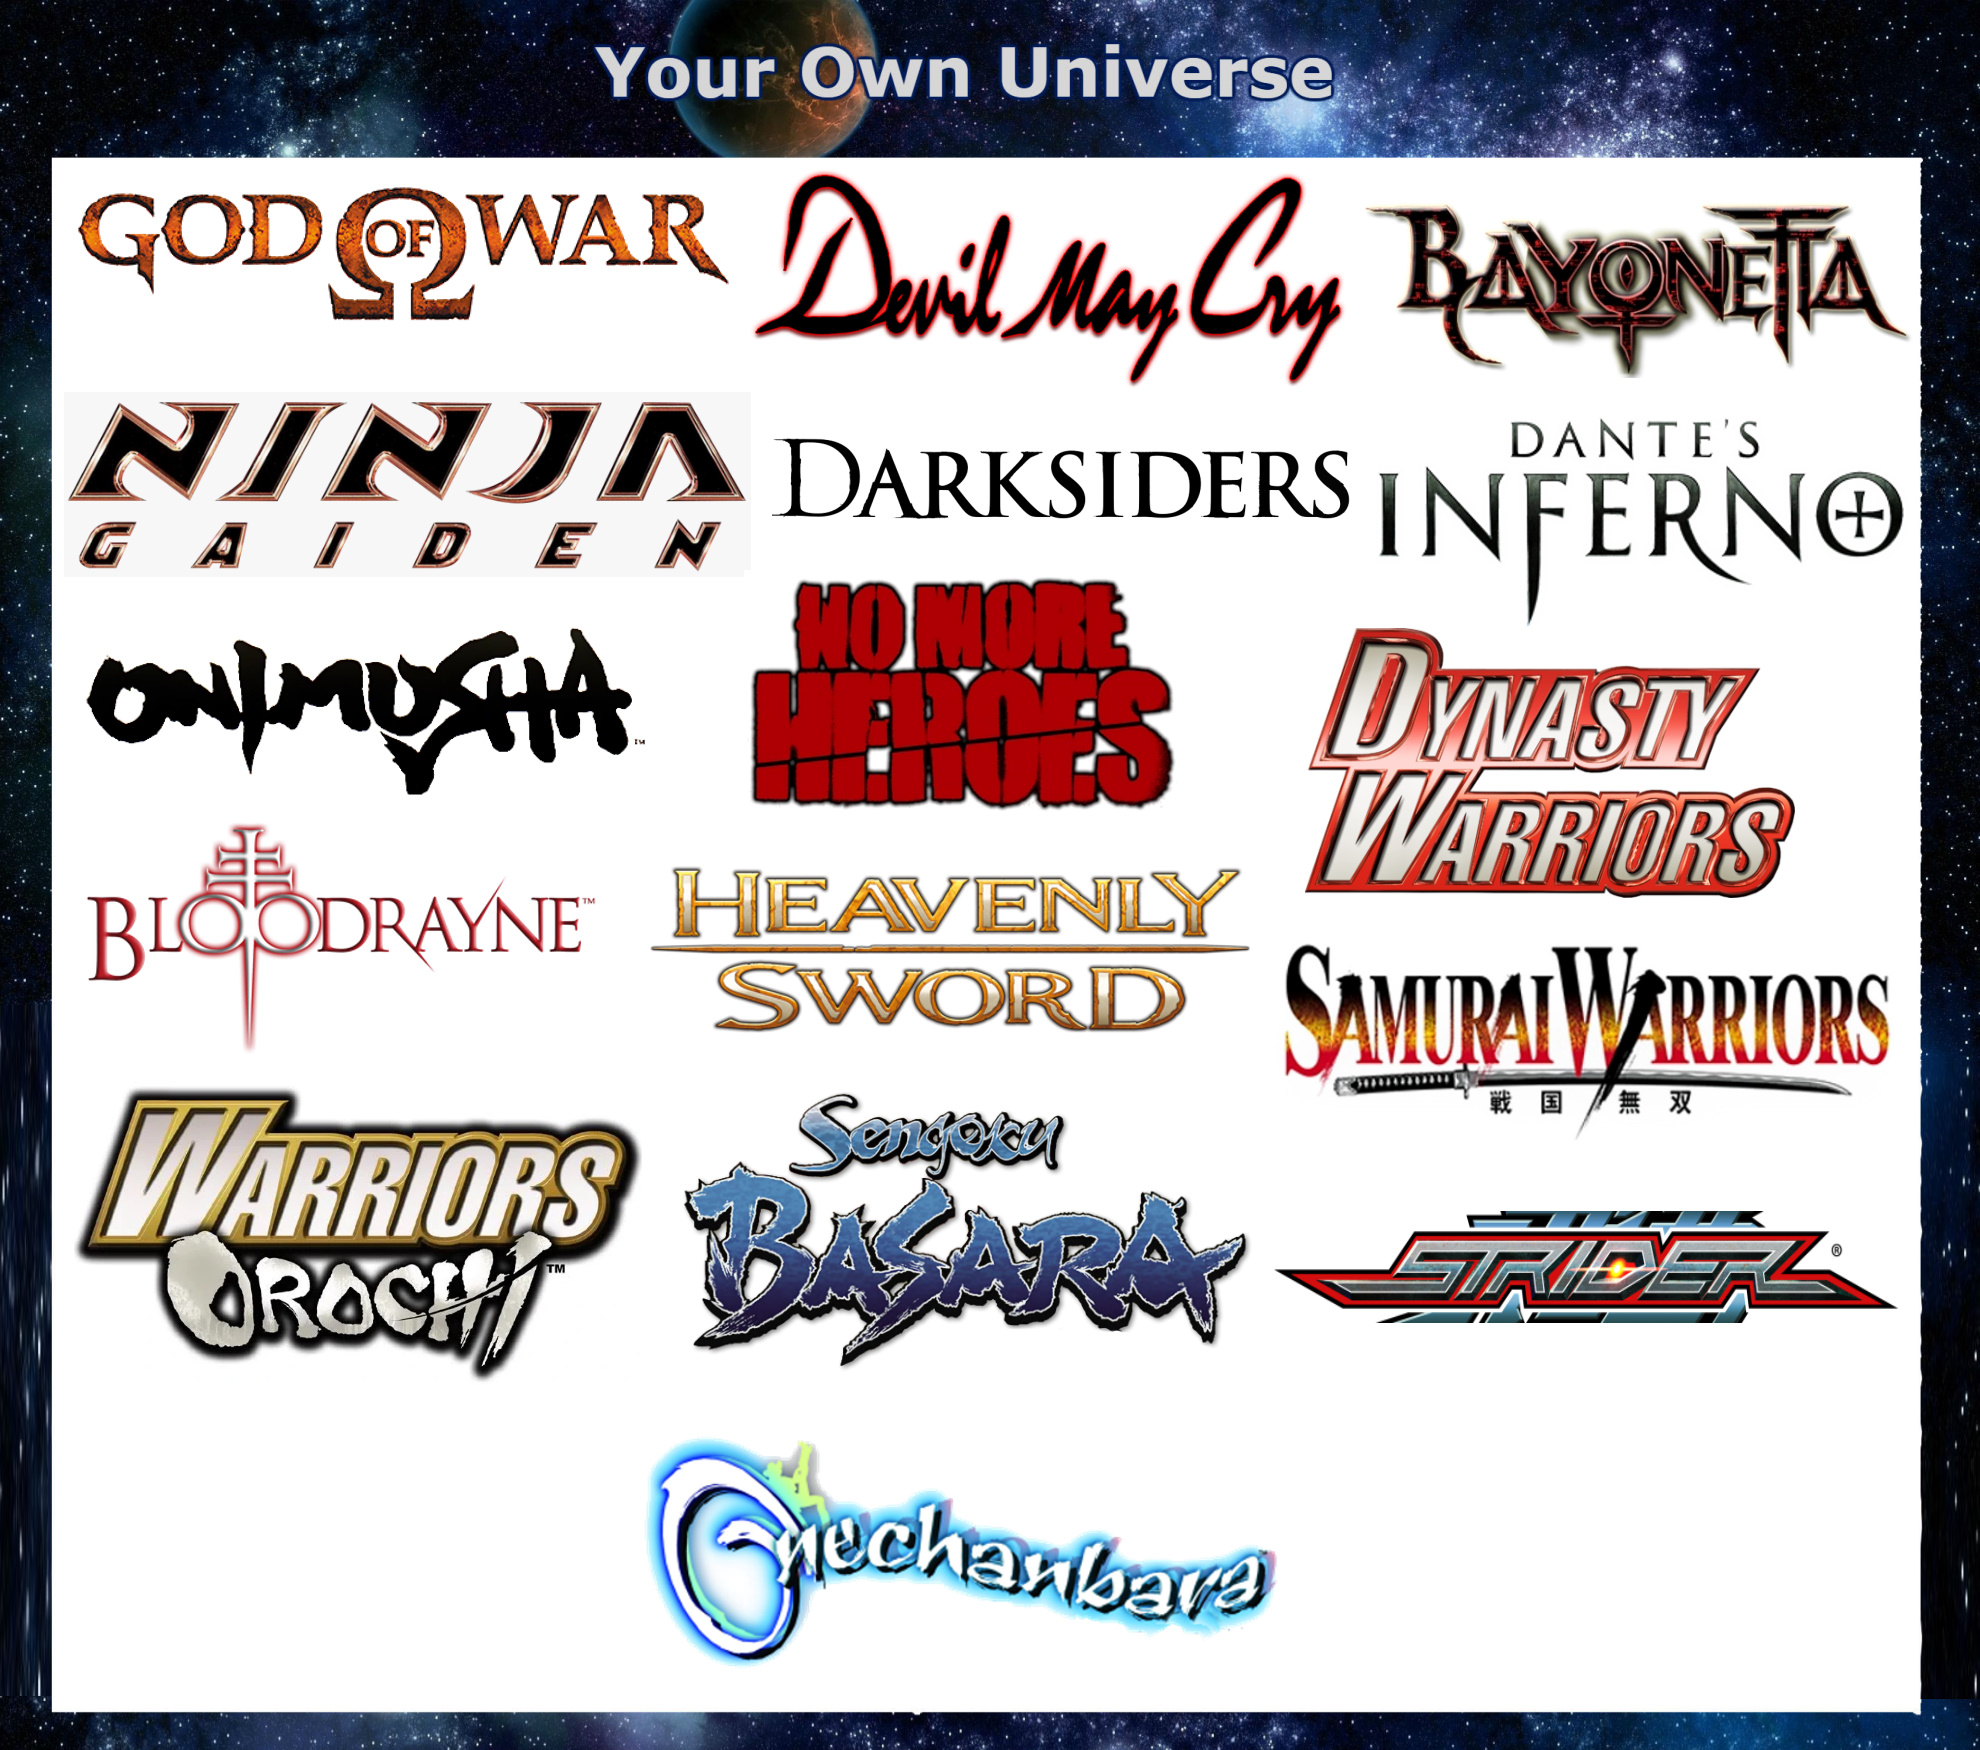 Hack and Slash Your Own Universe by ScrewBattle on DeviantArt